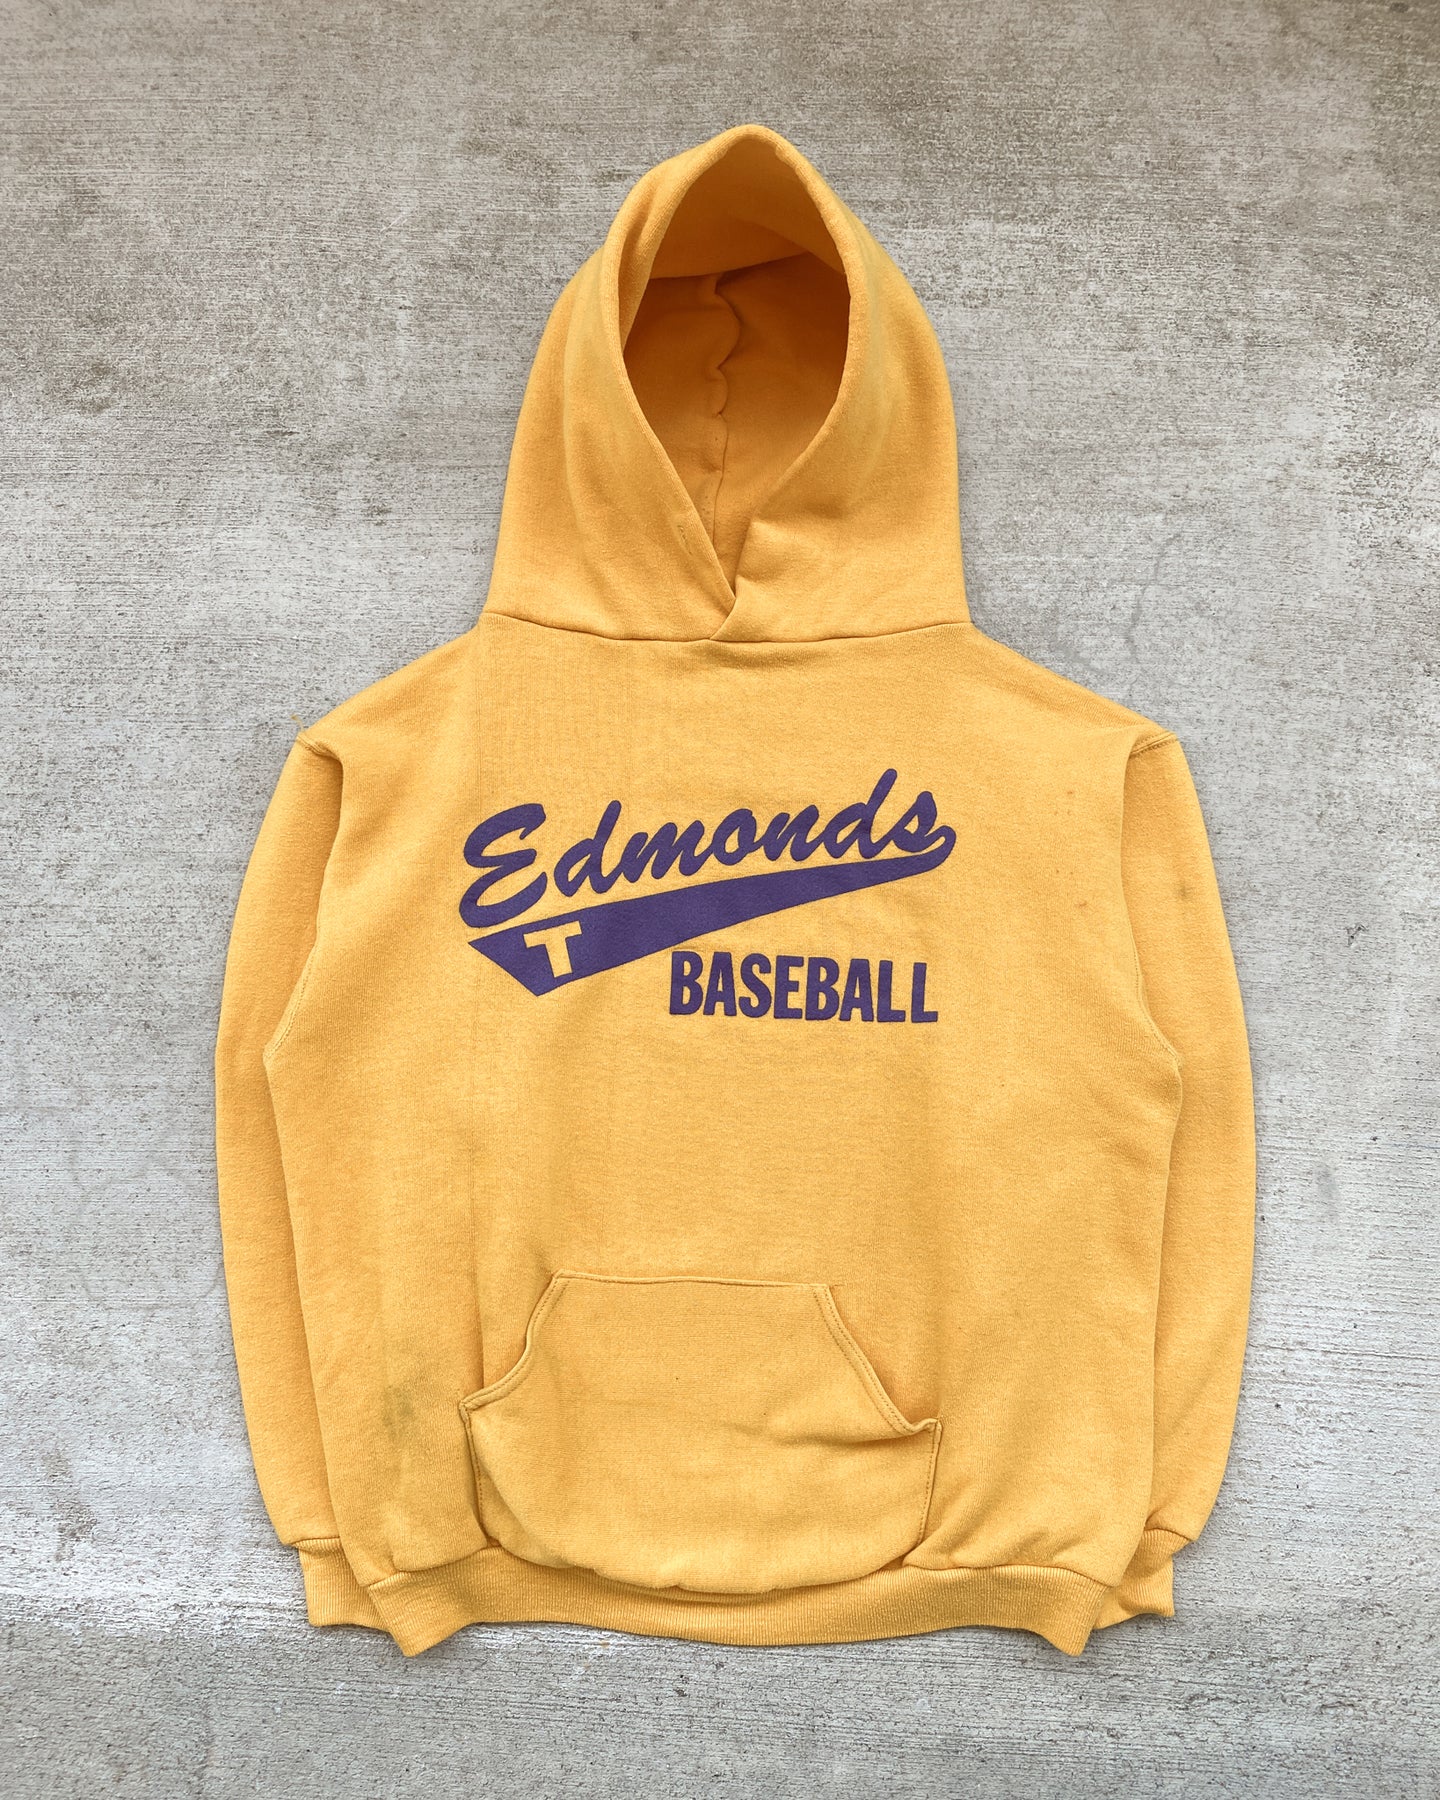 1970s Russell Athletic Edmonds Baseball Hoodie - Size Large